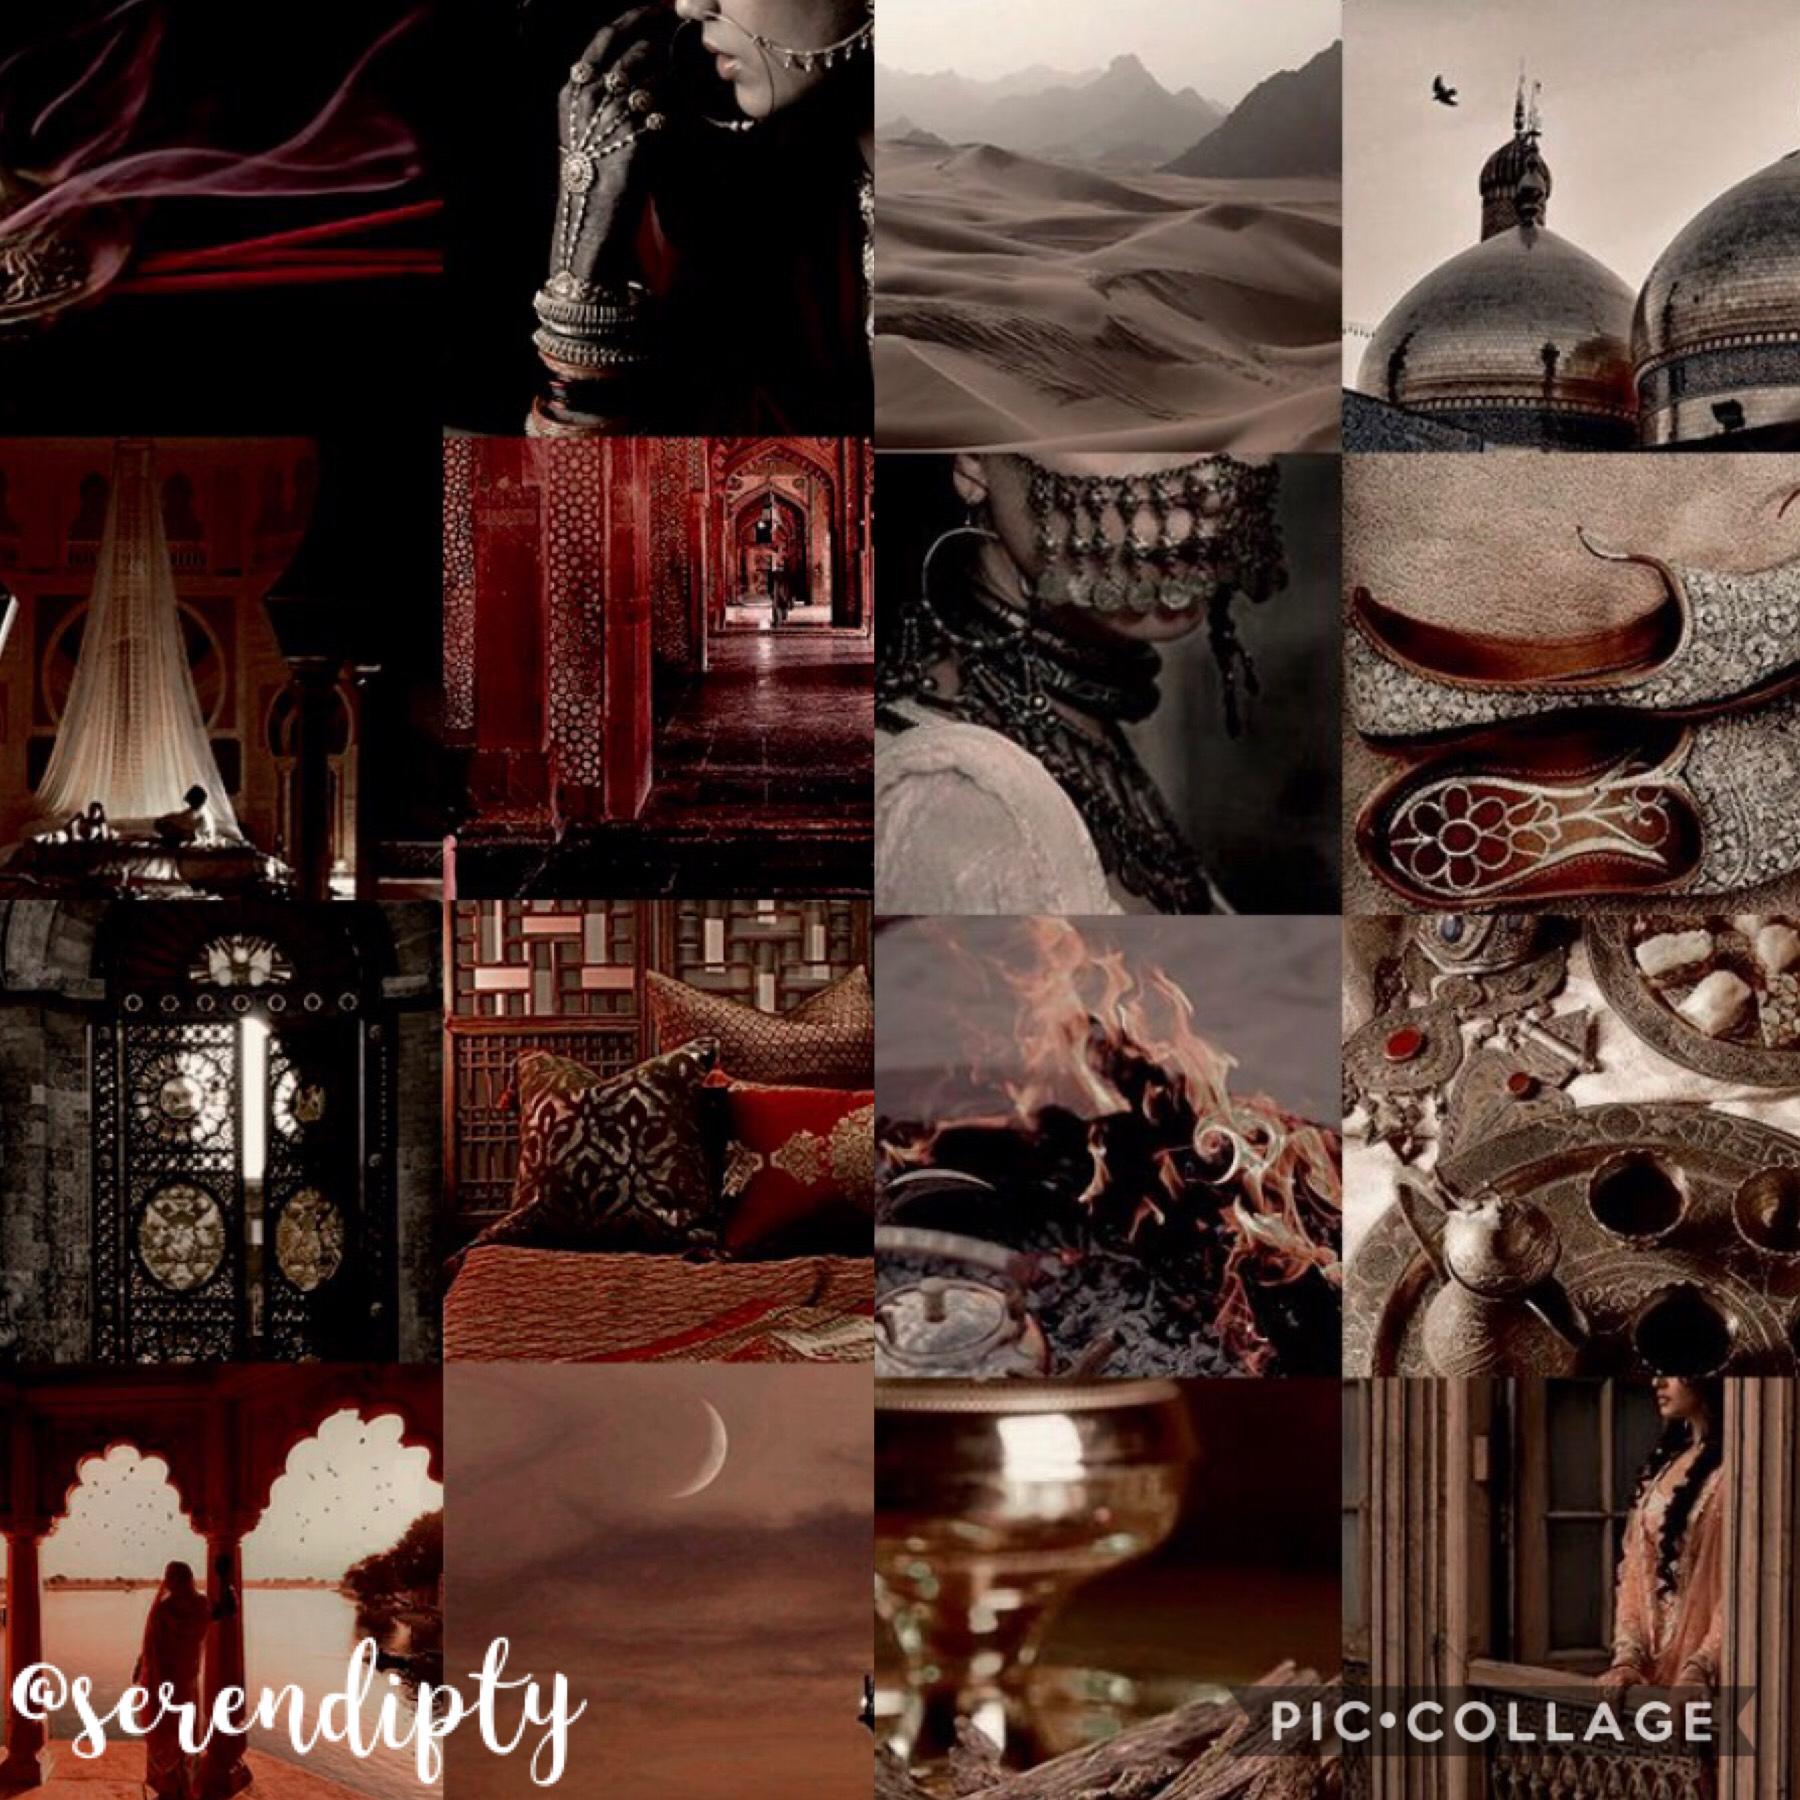 Really likin the Arab vibe so made an aesthetic for it 
❤️❤️